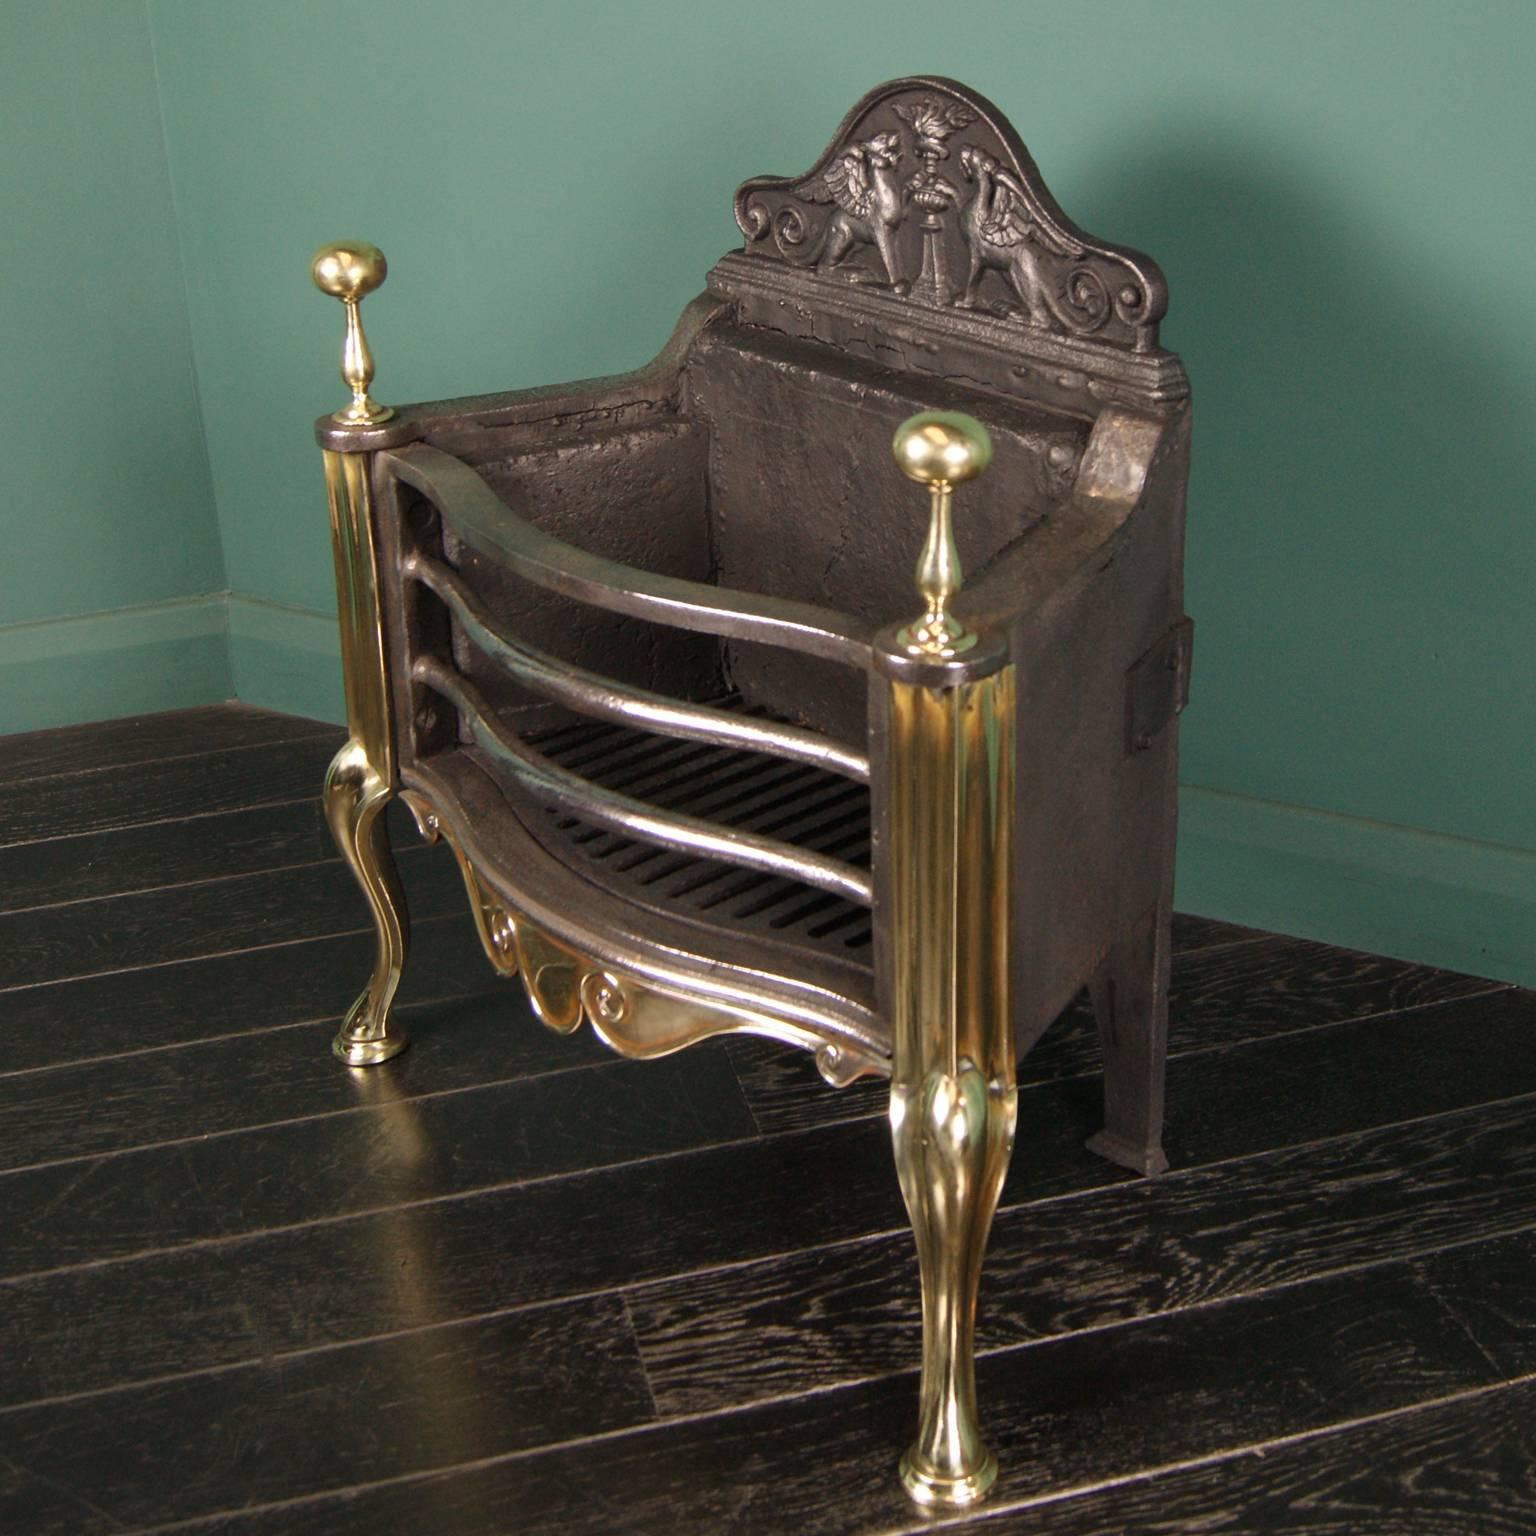 A cast-iron and brass fire basket (by Thomas Elsley of London), solid brass scrolled fret between shaped legs. Cast-iron shaped front bars with ball finials uppermost and an ornate crested back plate.